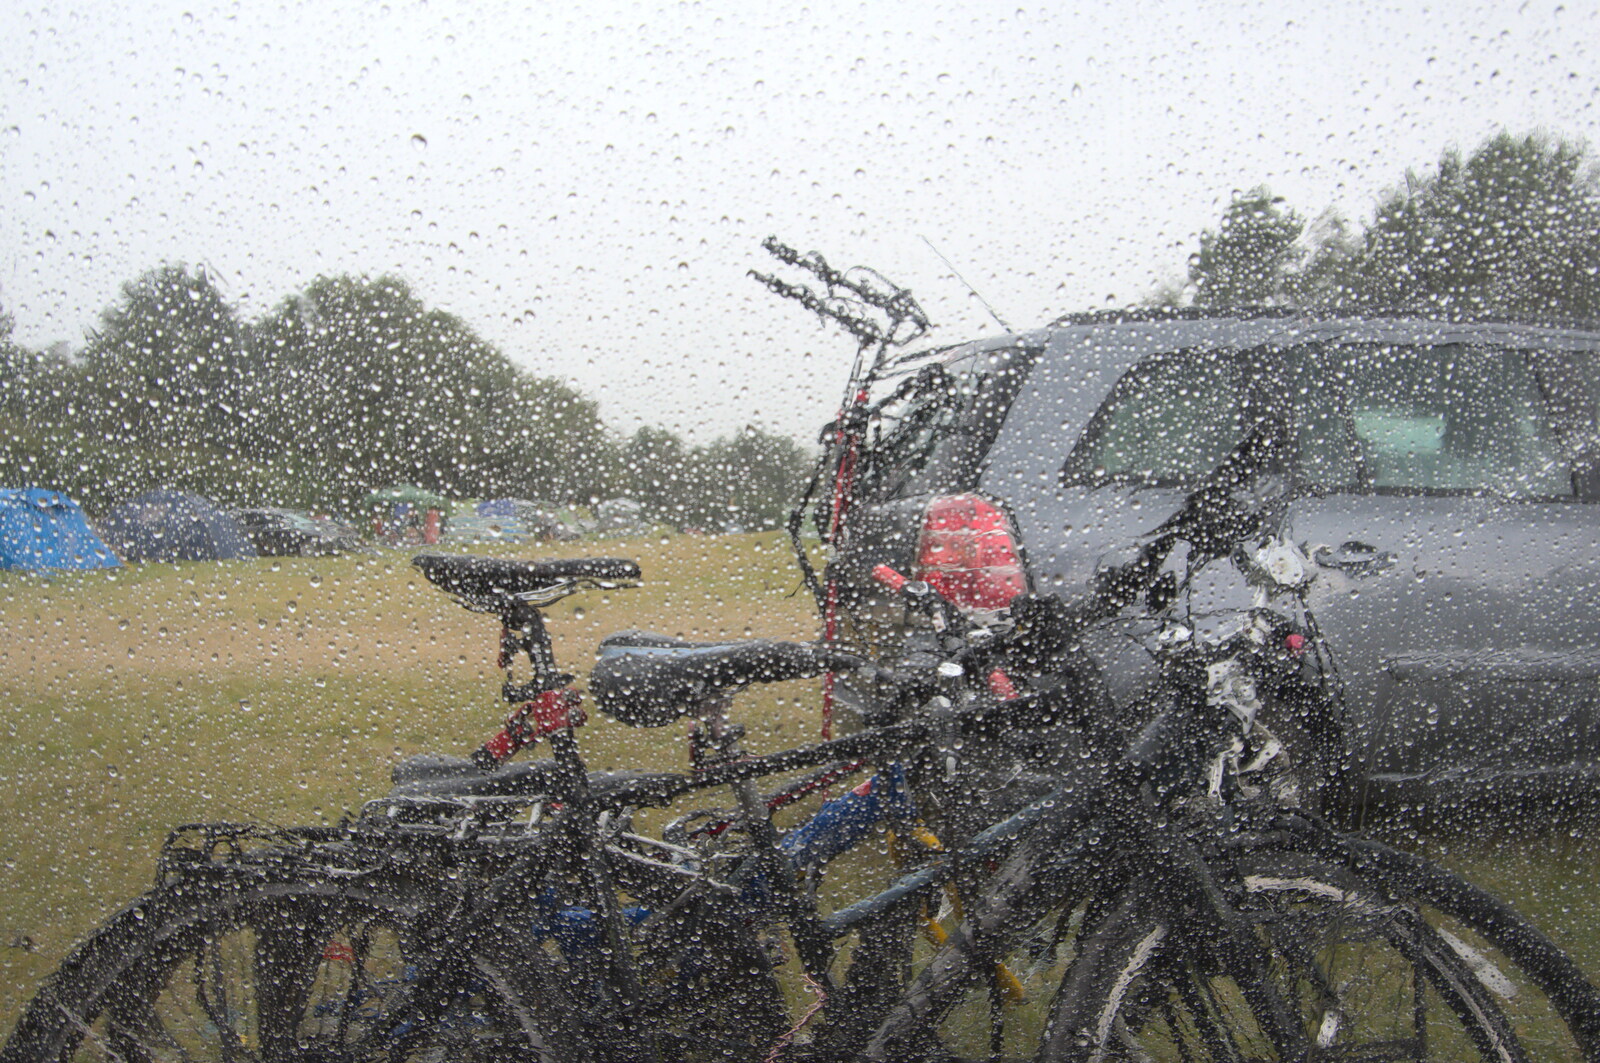 The view from inside the awning, in lashing rain from Camping on the Coast, East Runton, North Norfolk - 25th July 2020